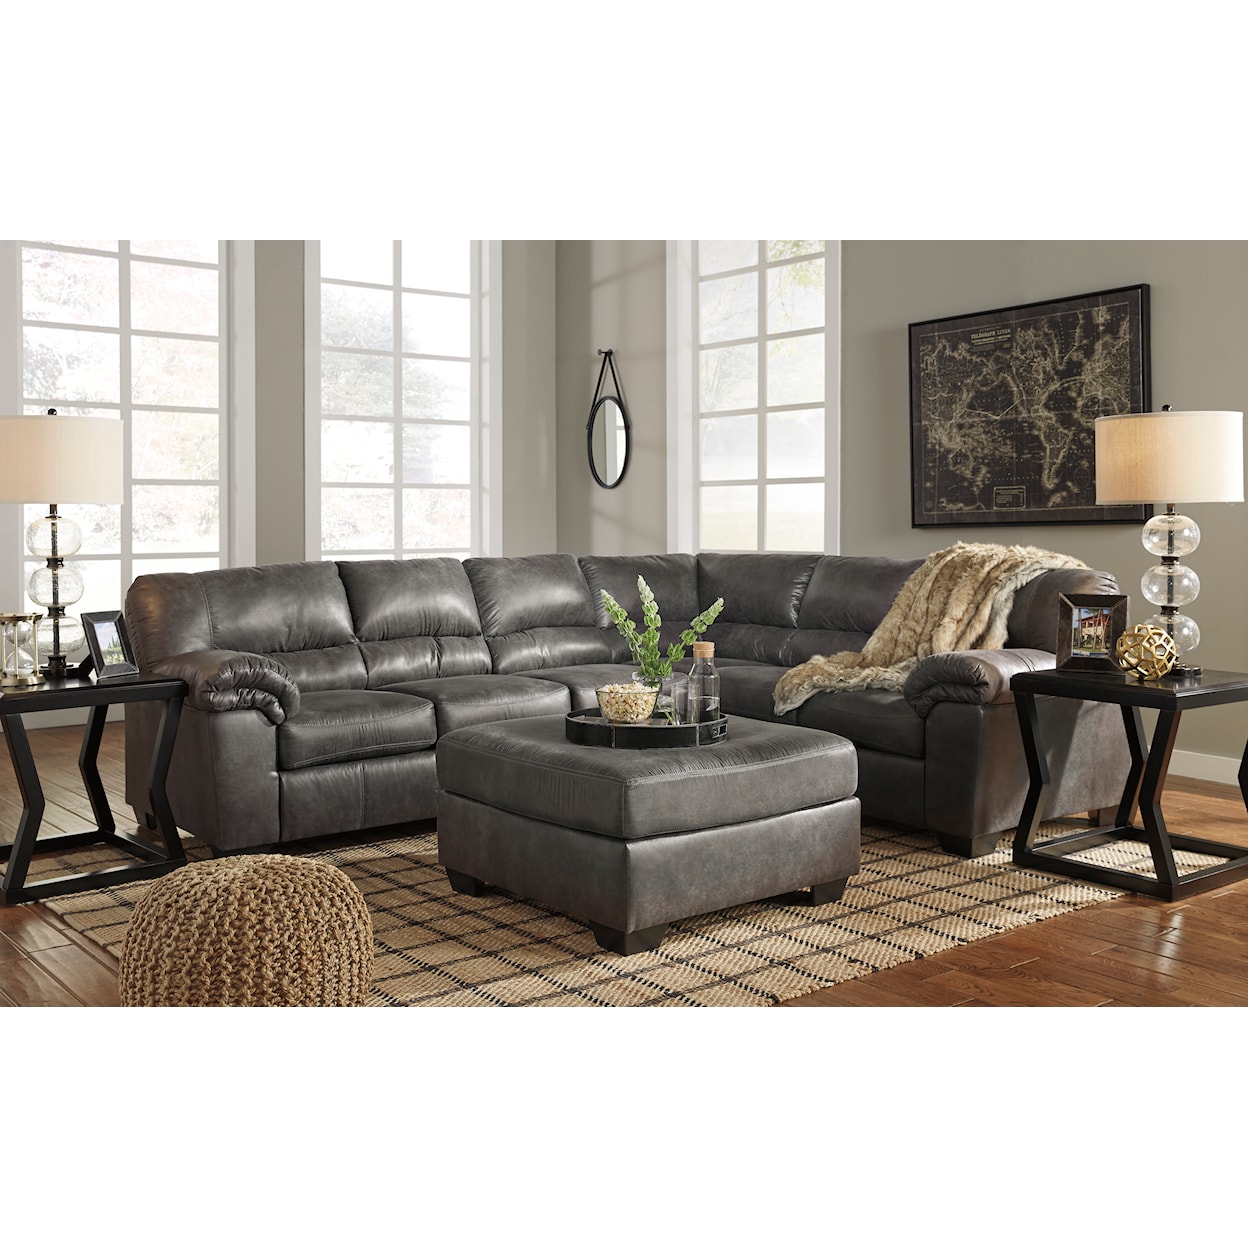 Ashley Furniture Signature Design Bladen 3-Piece Sectional with Ottoman